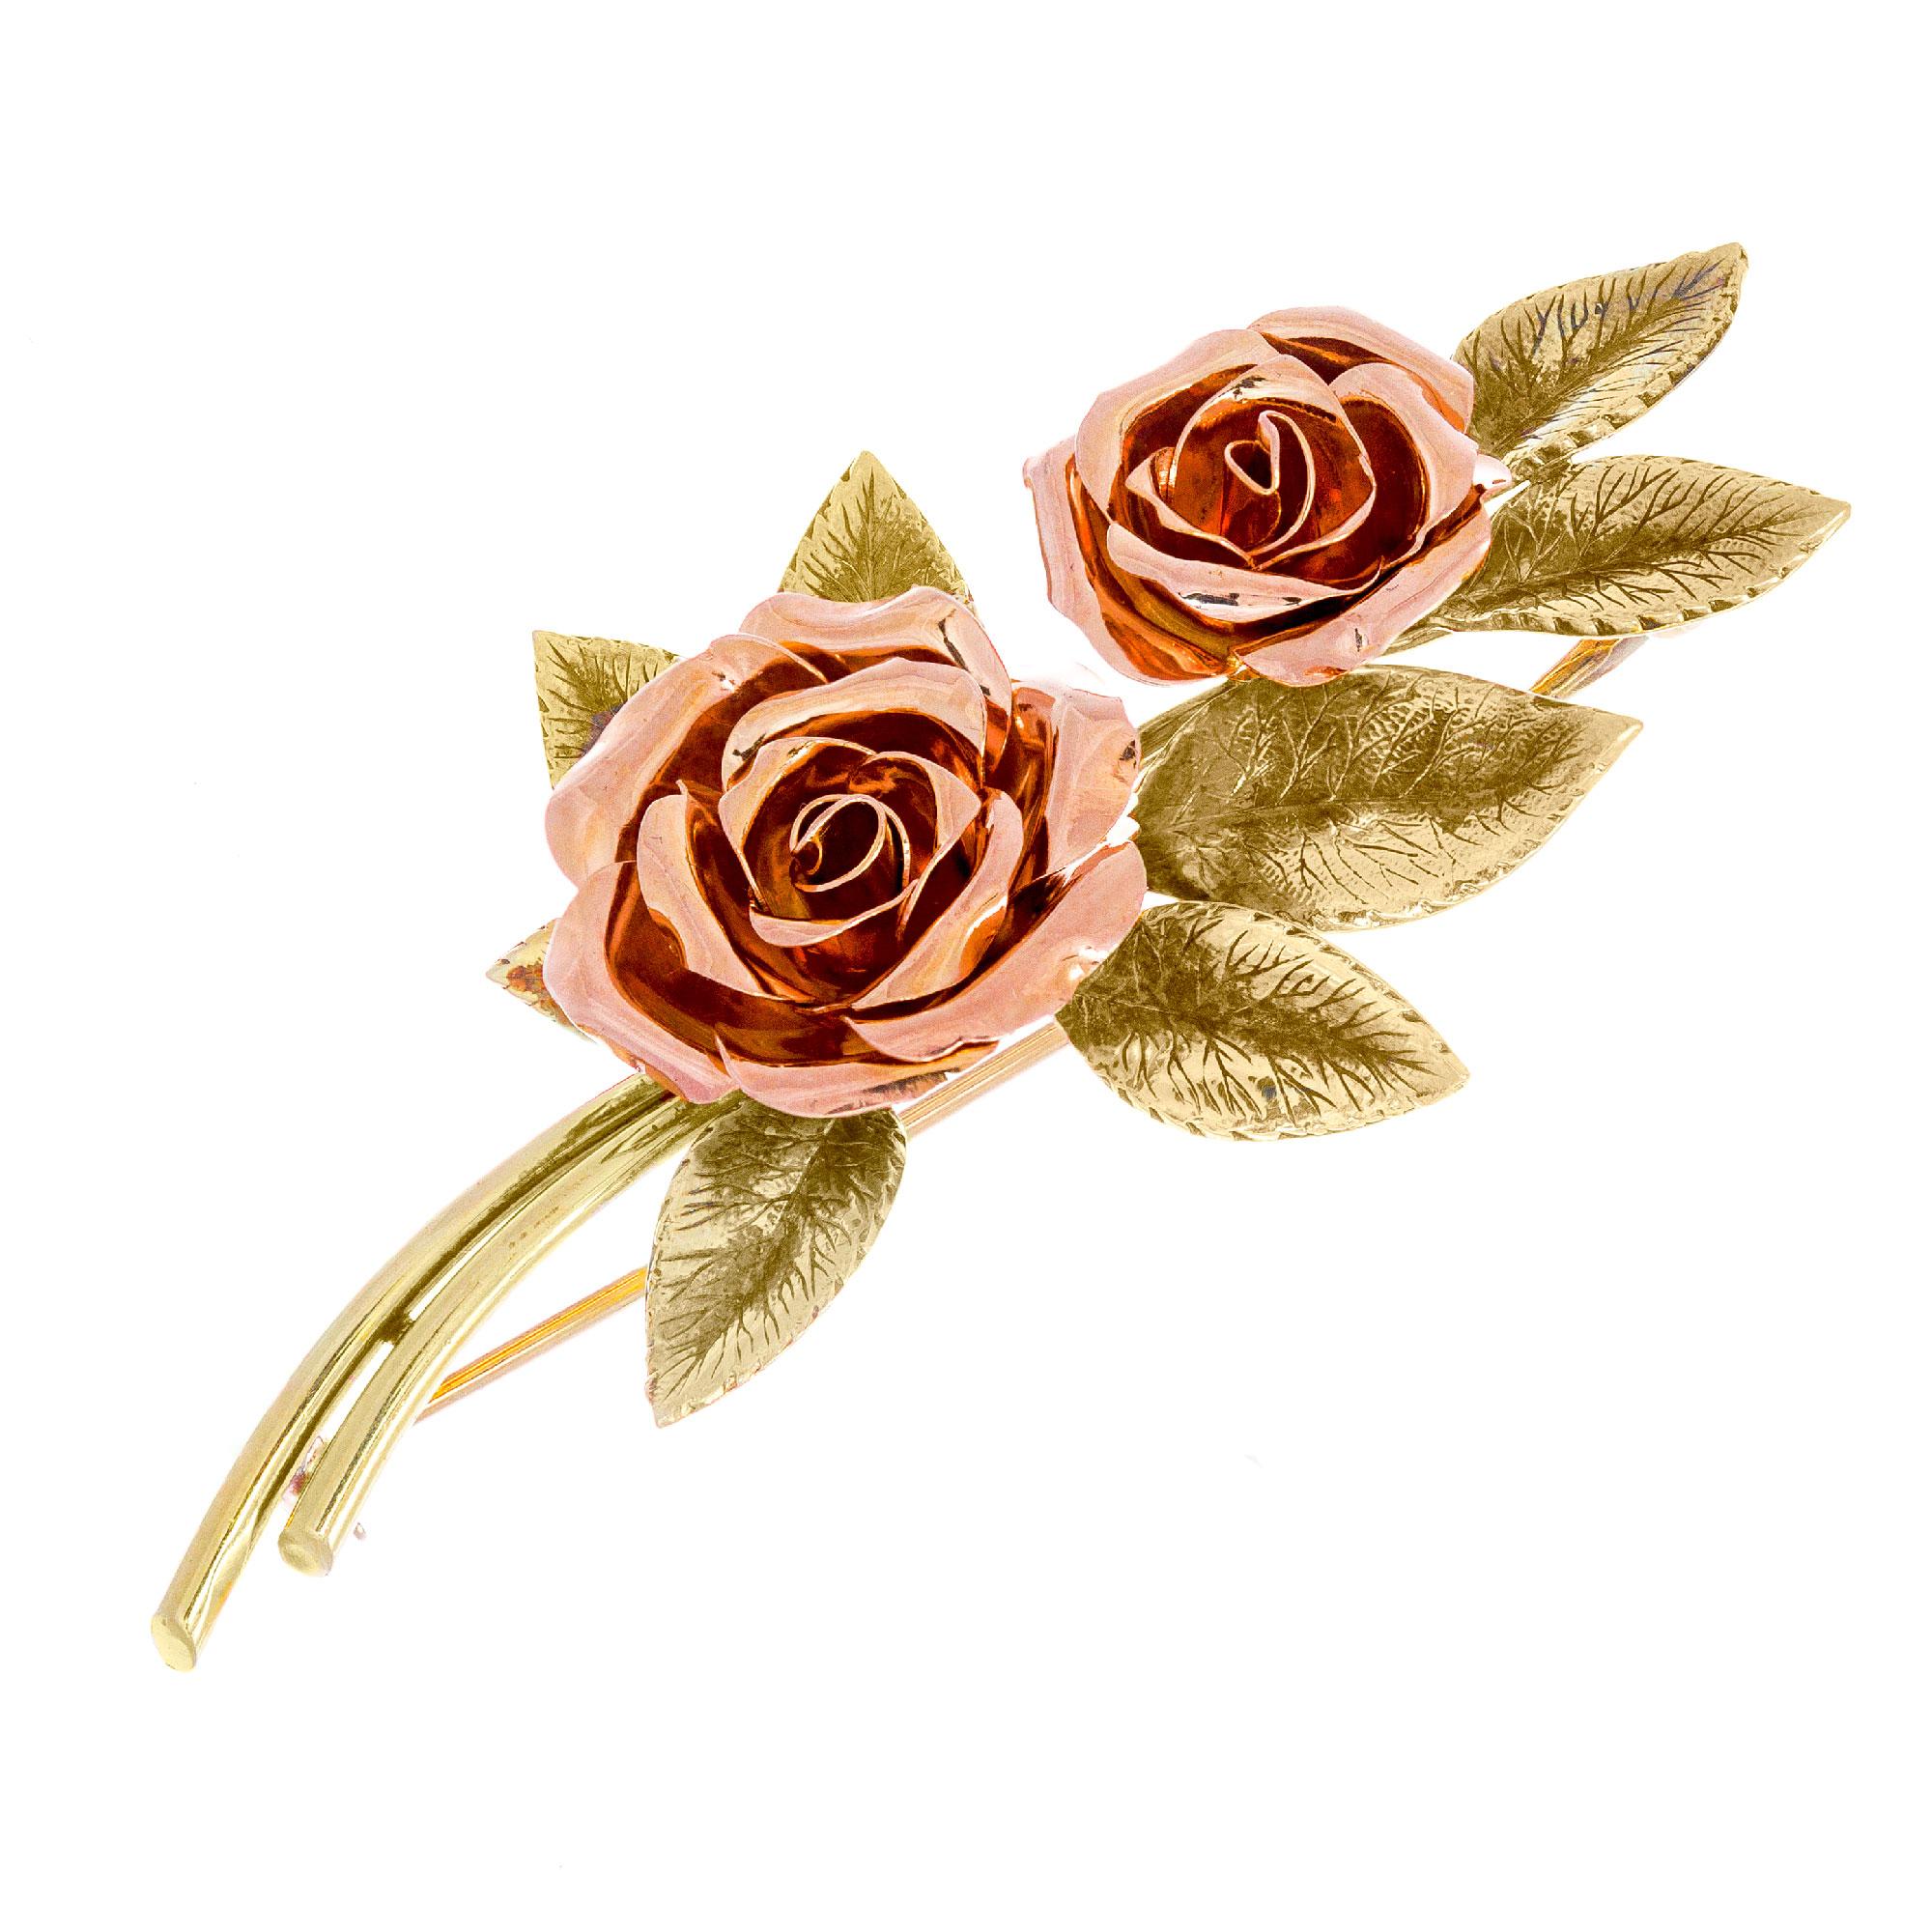 Tiffany & Co two tone gold double rose brooch.

14k yellow gold 
14k rose gold 
Stamped: 14k
Hallmark: Tiffany 
17.7 grams
Top to bottom: 71.2mm or 2.75 Inches
Width: 33.6mm or 1/3 Inch
Depth or thickness: 10.9mm

